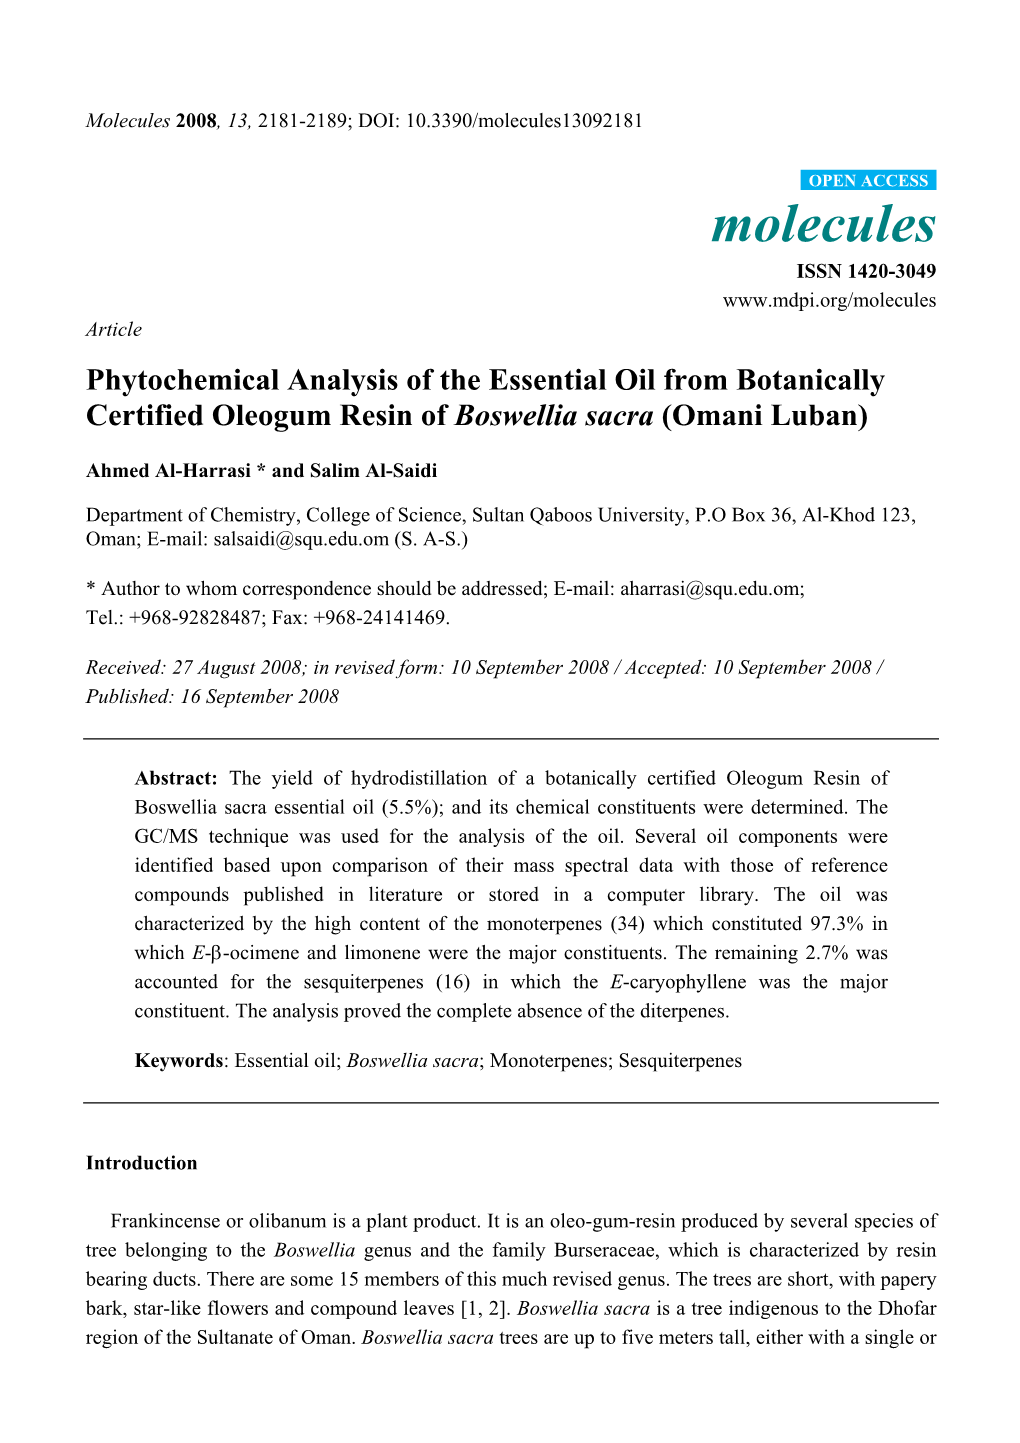 Phytochemical Analysis of the Essential Oil from Botanically Certified Oleogum Resin of Boswellia Sacra (Omani Luban)